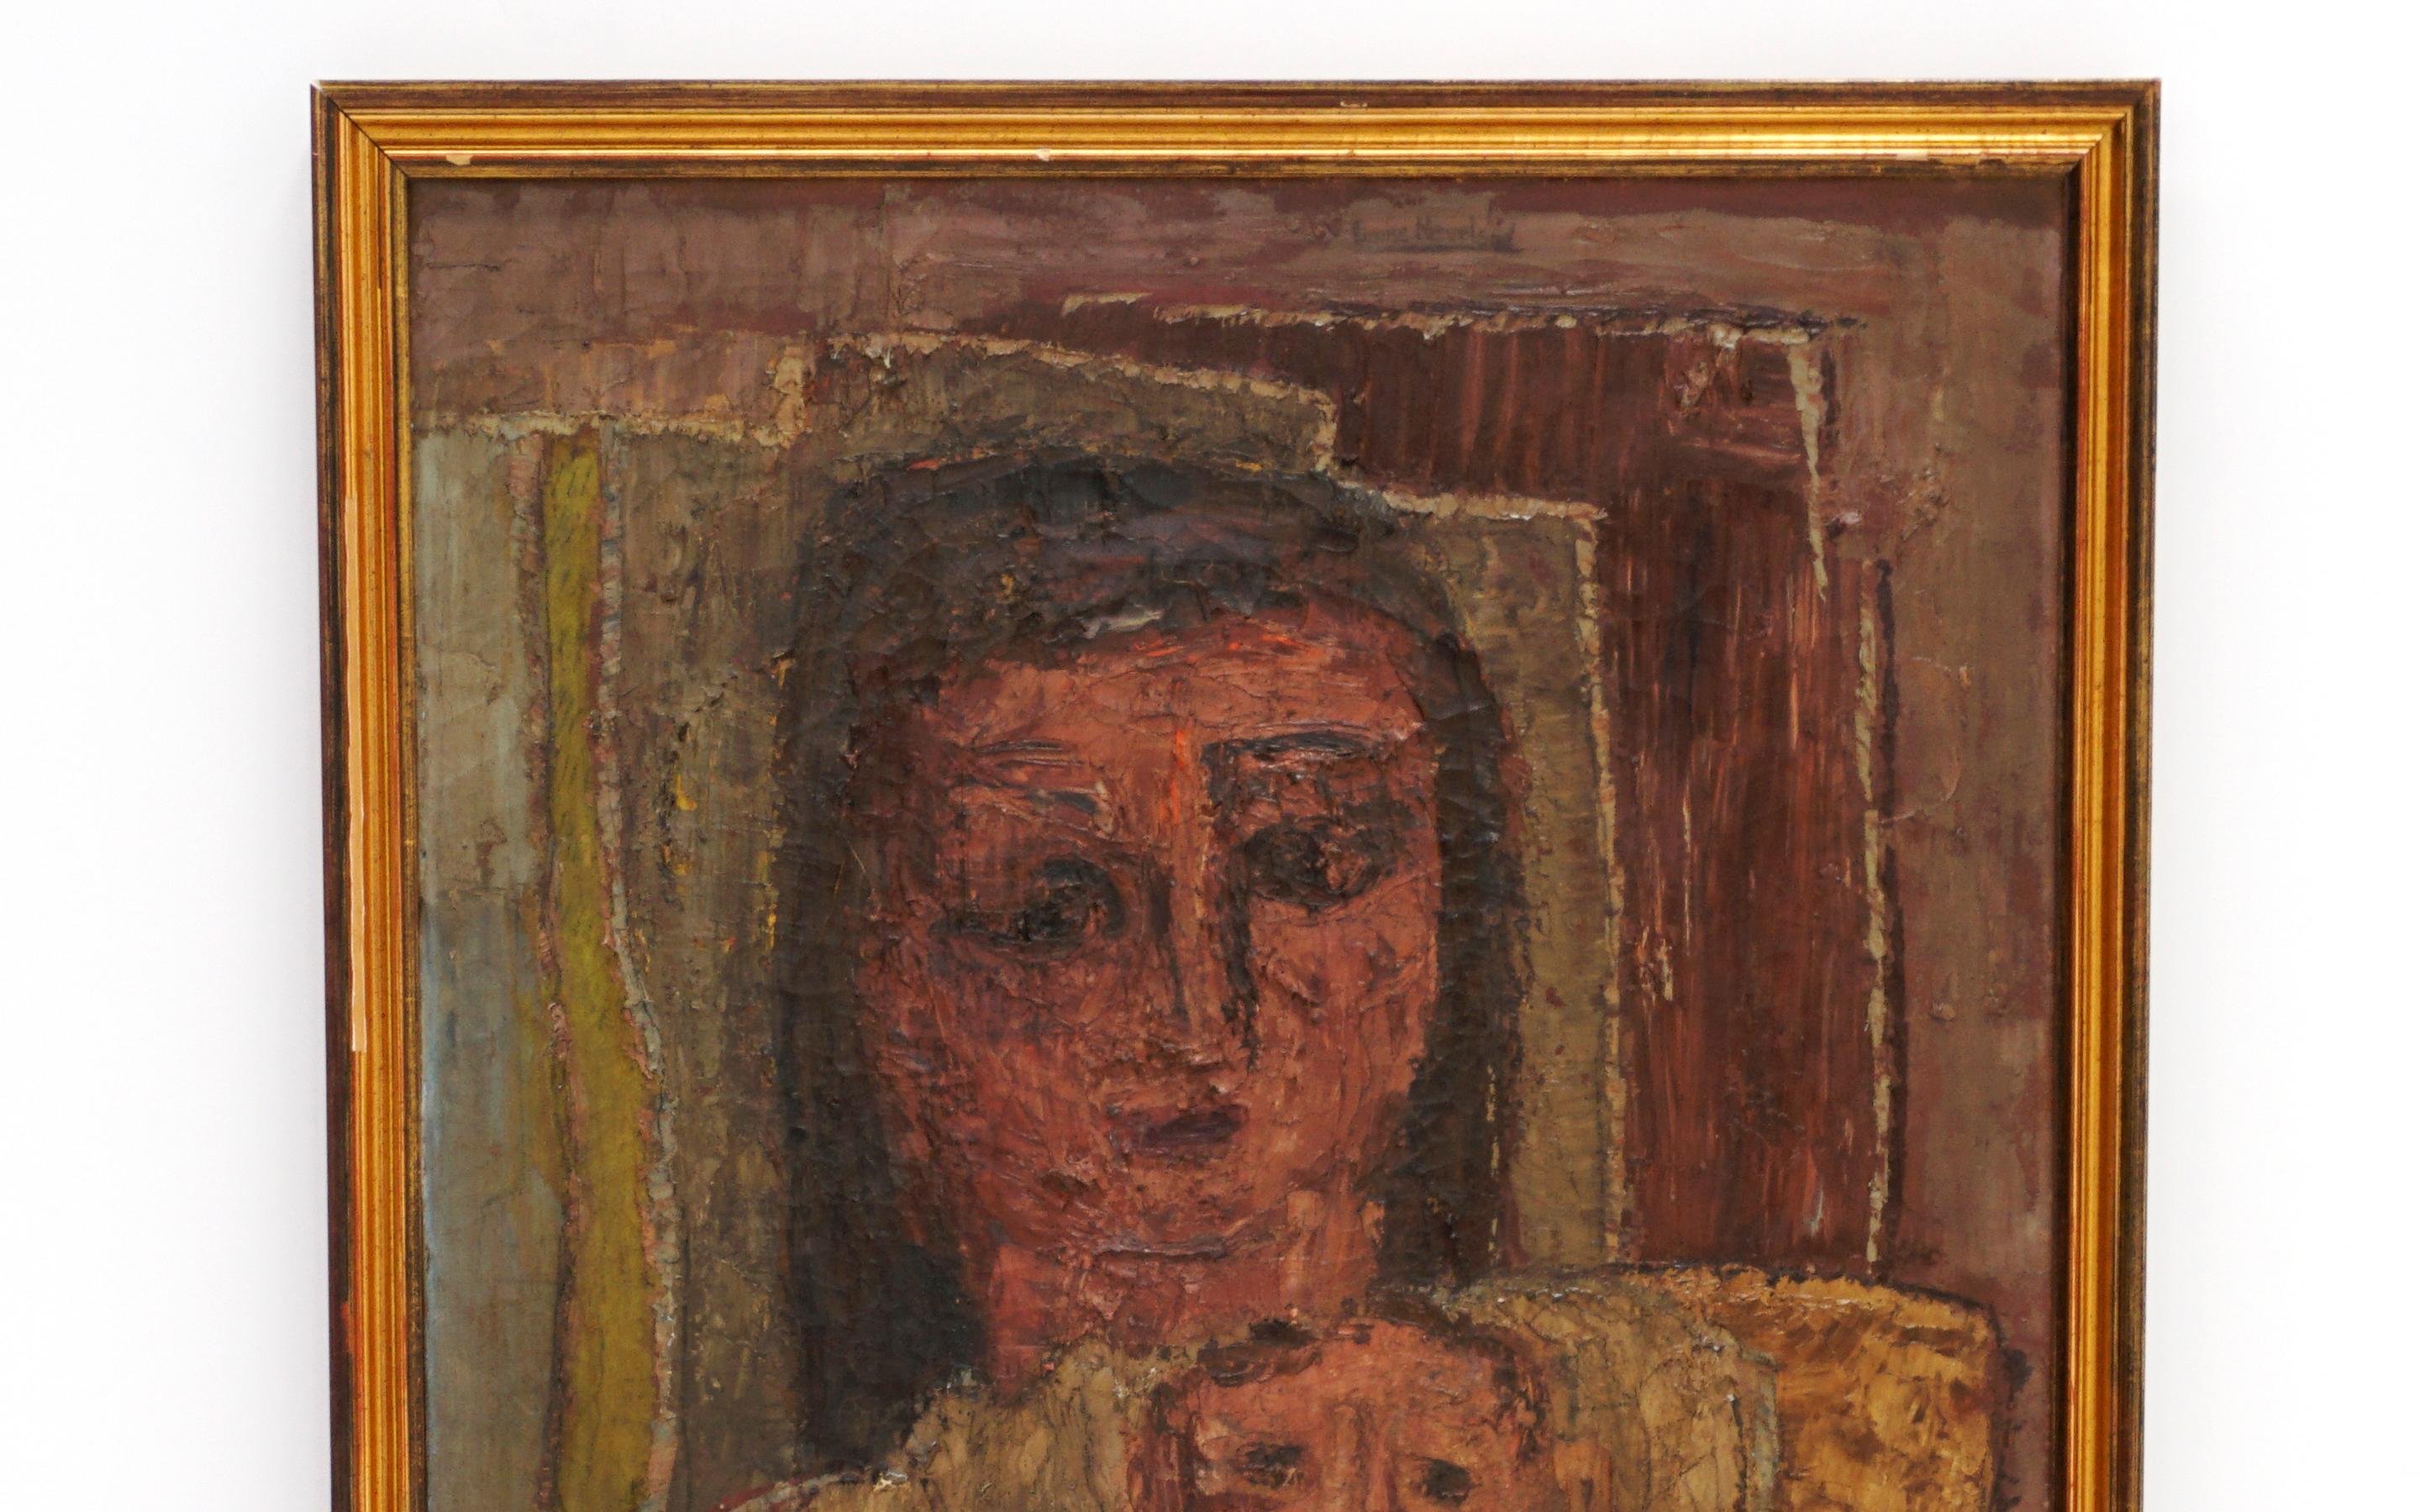 Louise Nevelson painting of a mother and child. Oil on canvas. Very good condition. Signed by the artist. The original frame shows signs of wear.